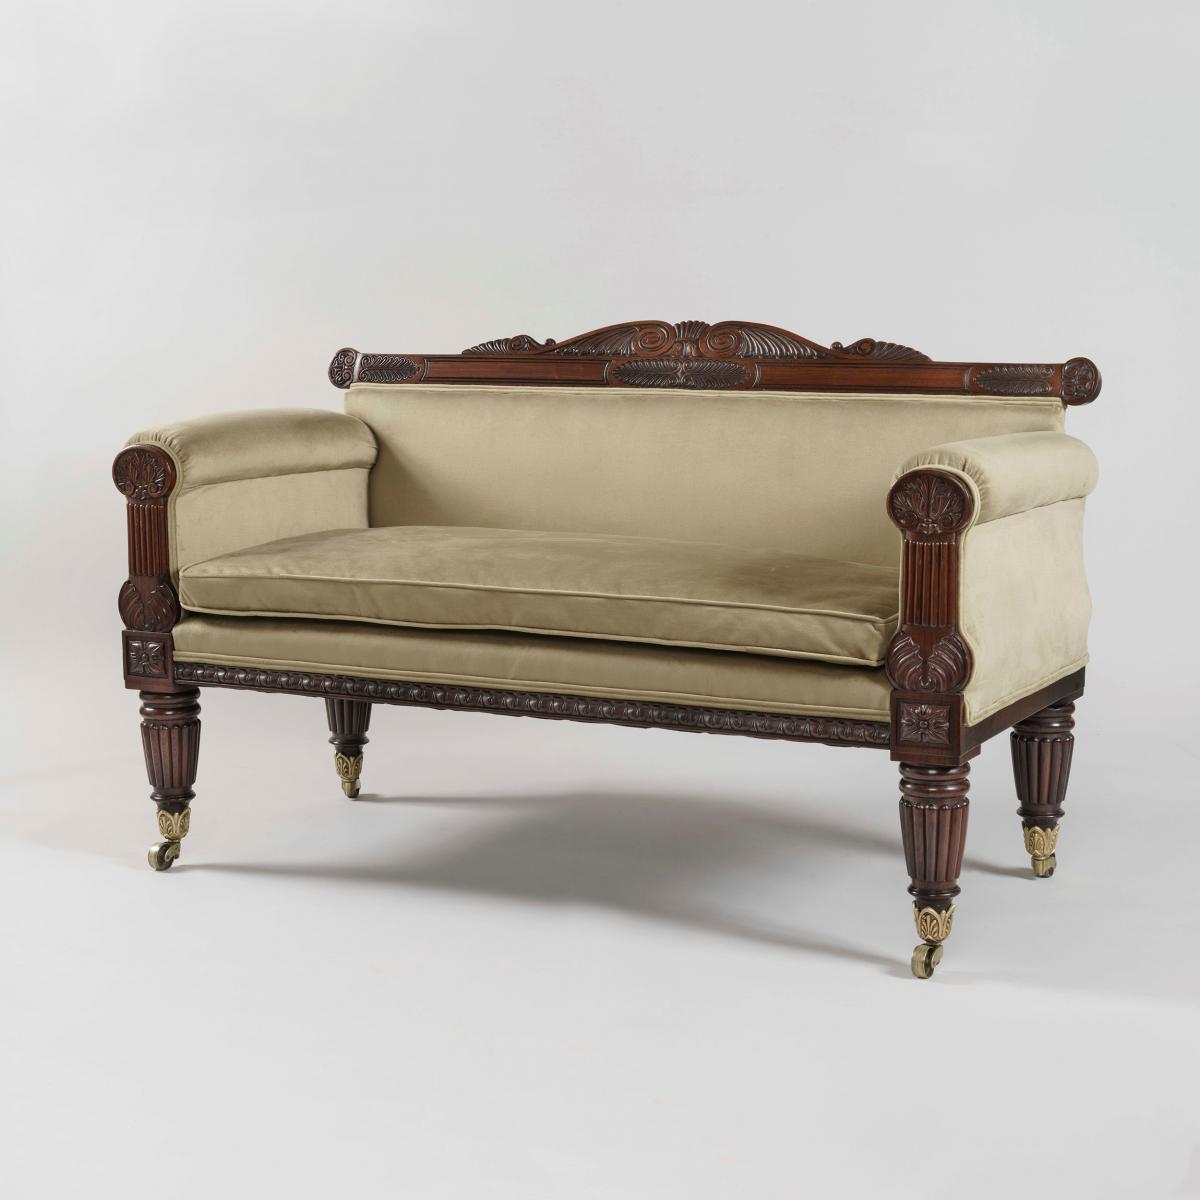 George IV Sofa In the Grecian Manner